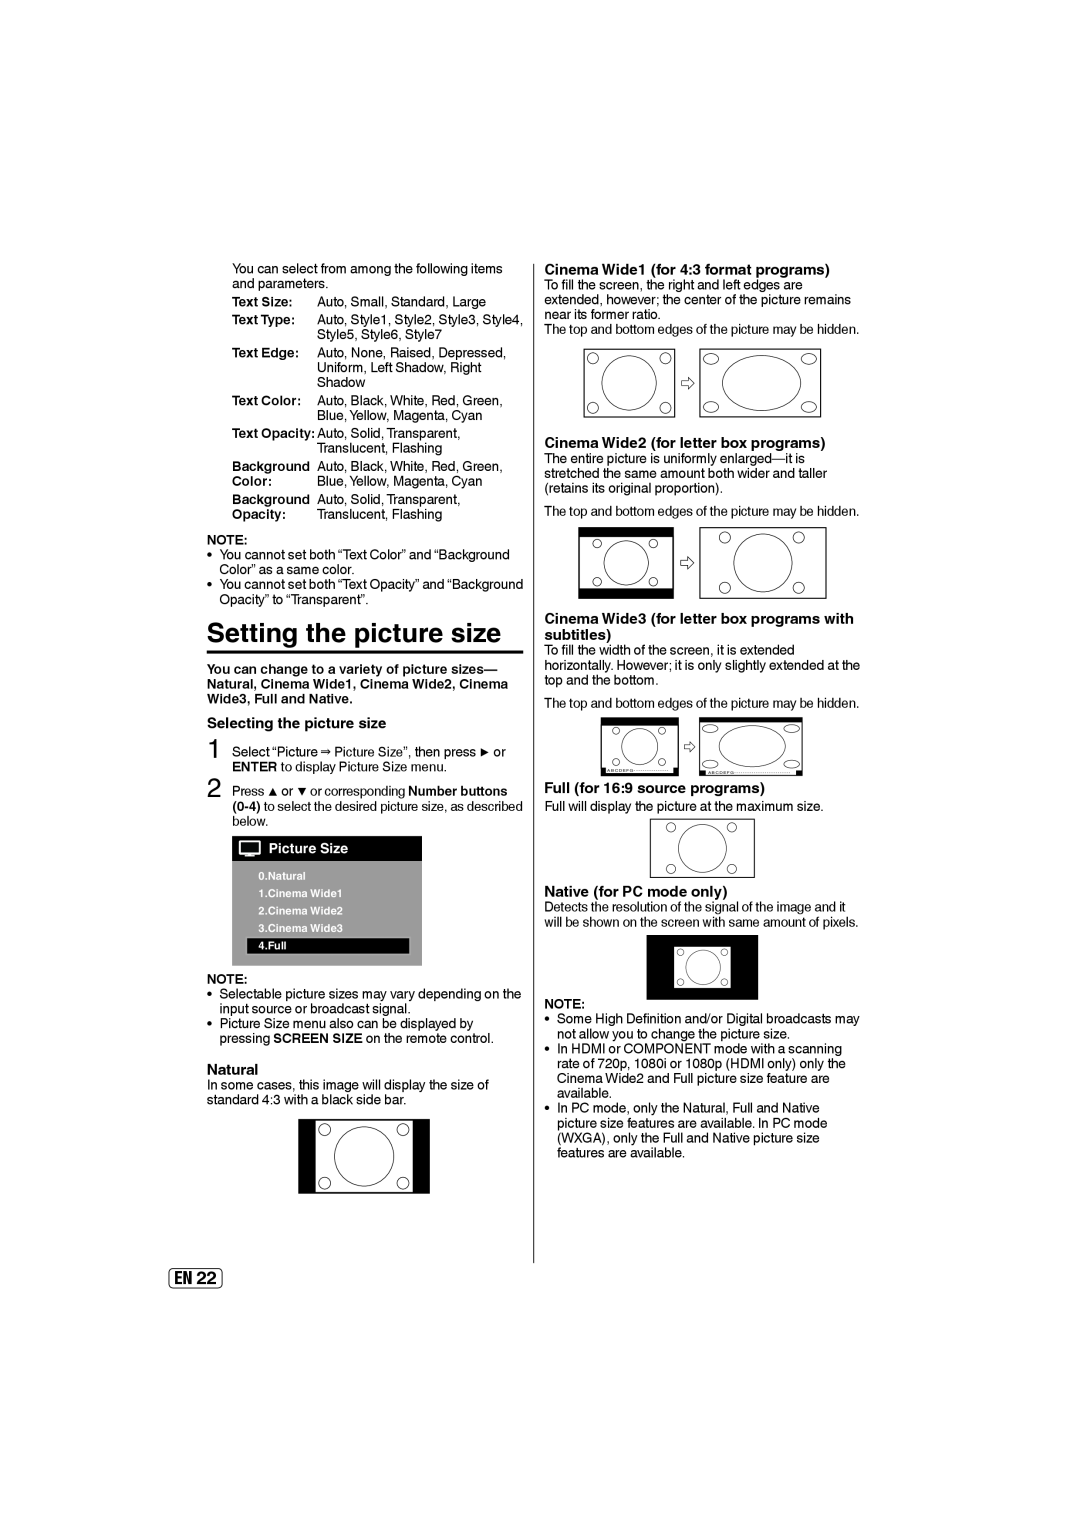 Sansui SLEDVD197 Setting the picture size, Selecting the picture size, Natural, Full for 169 source programs, Picture Size 